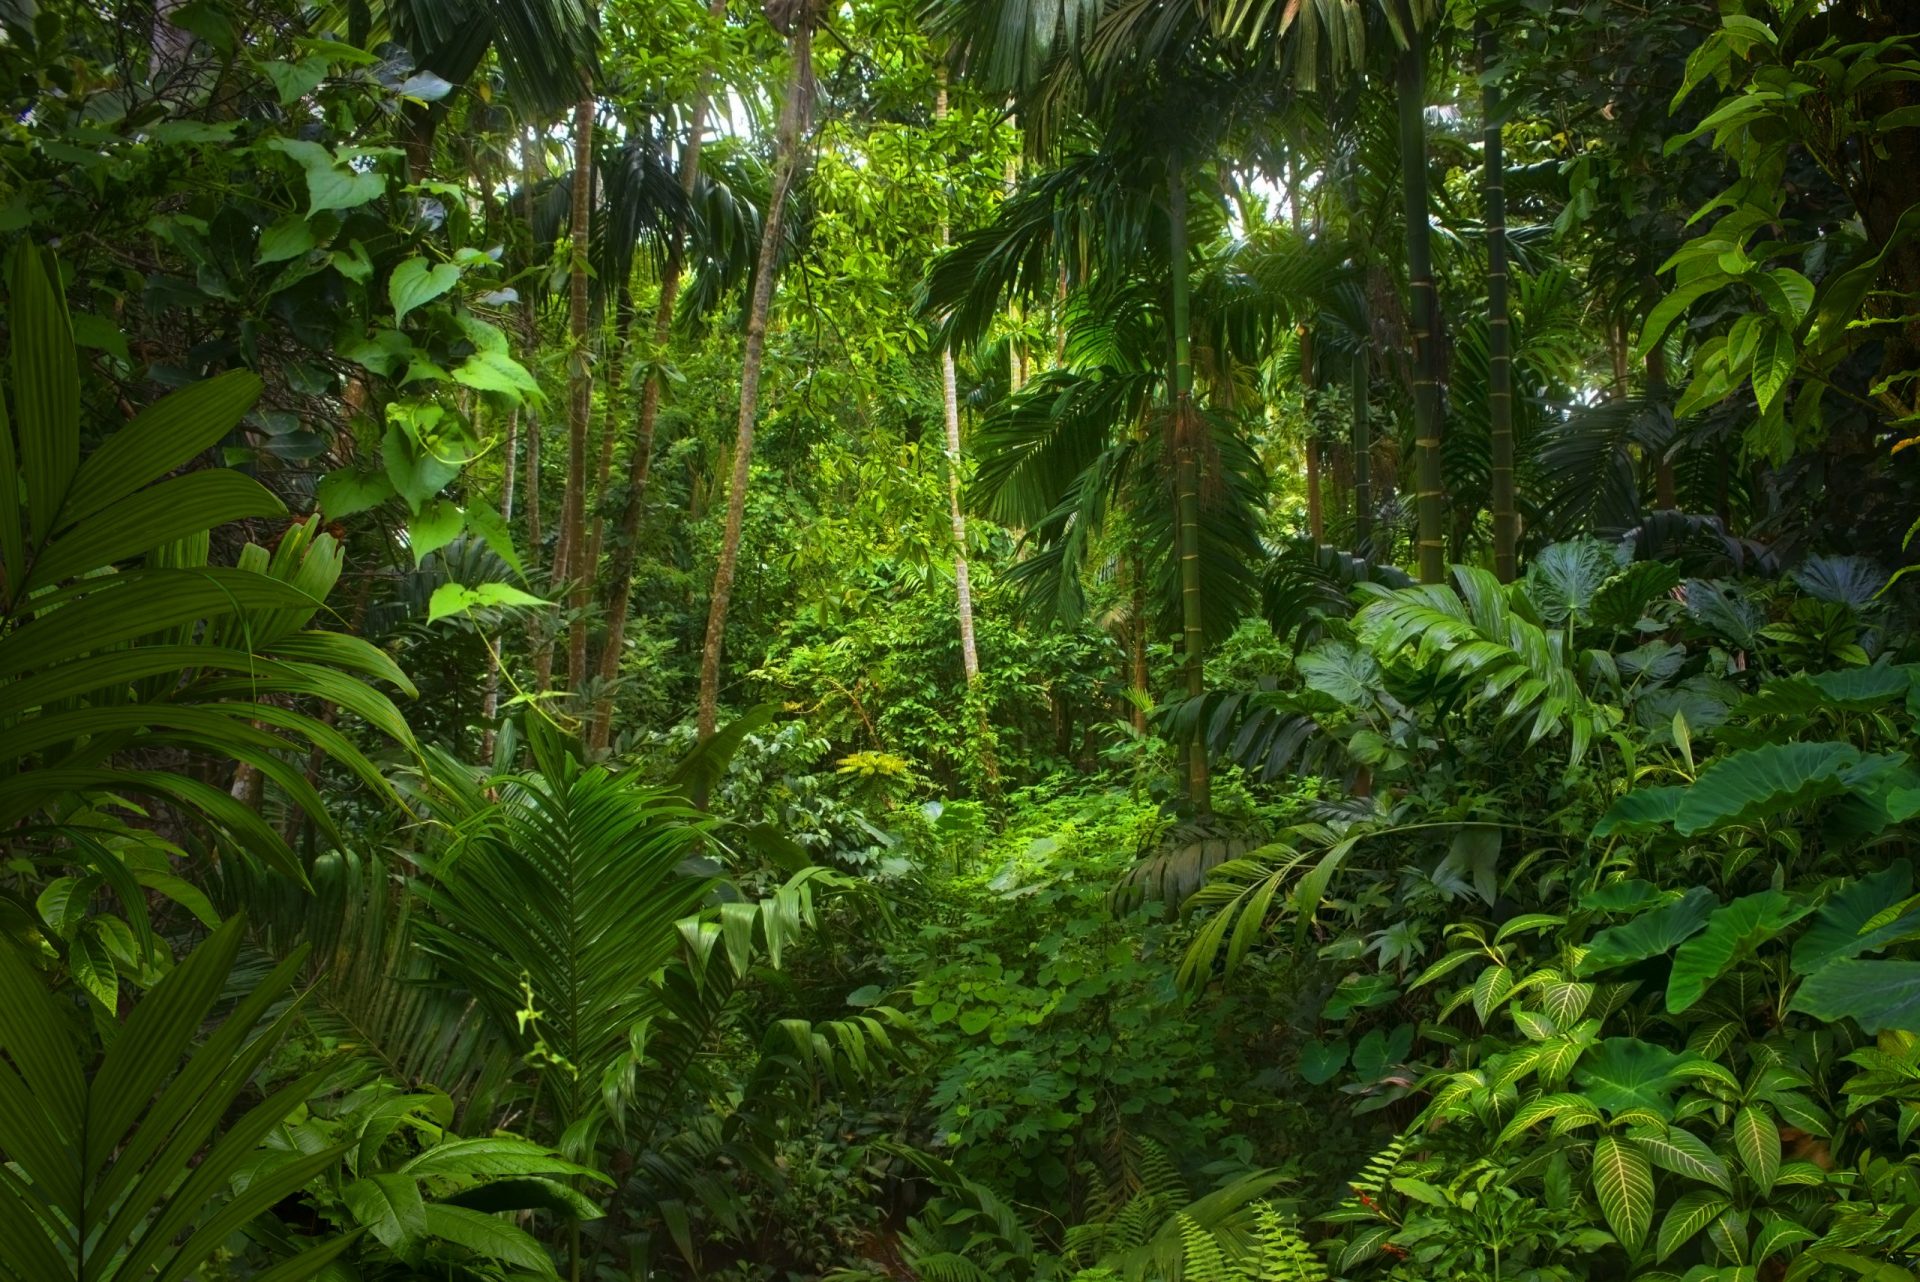 Rainforest stores carbon, regulates the water cycle and protects over 50% of earth's biodiversity.